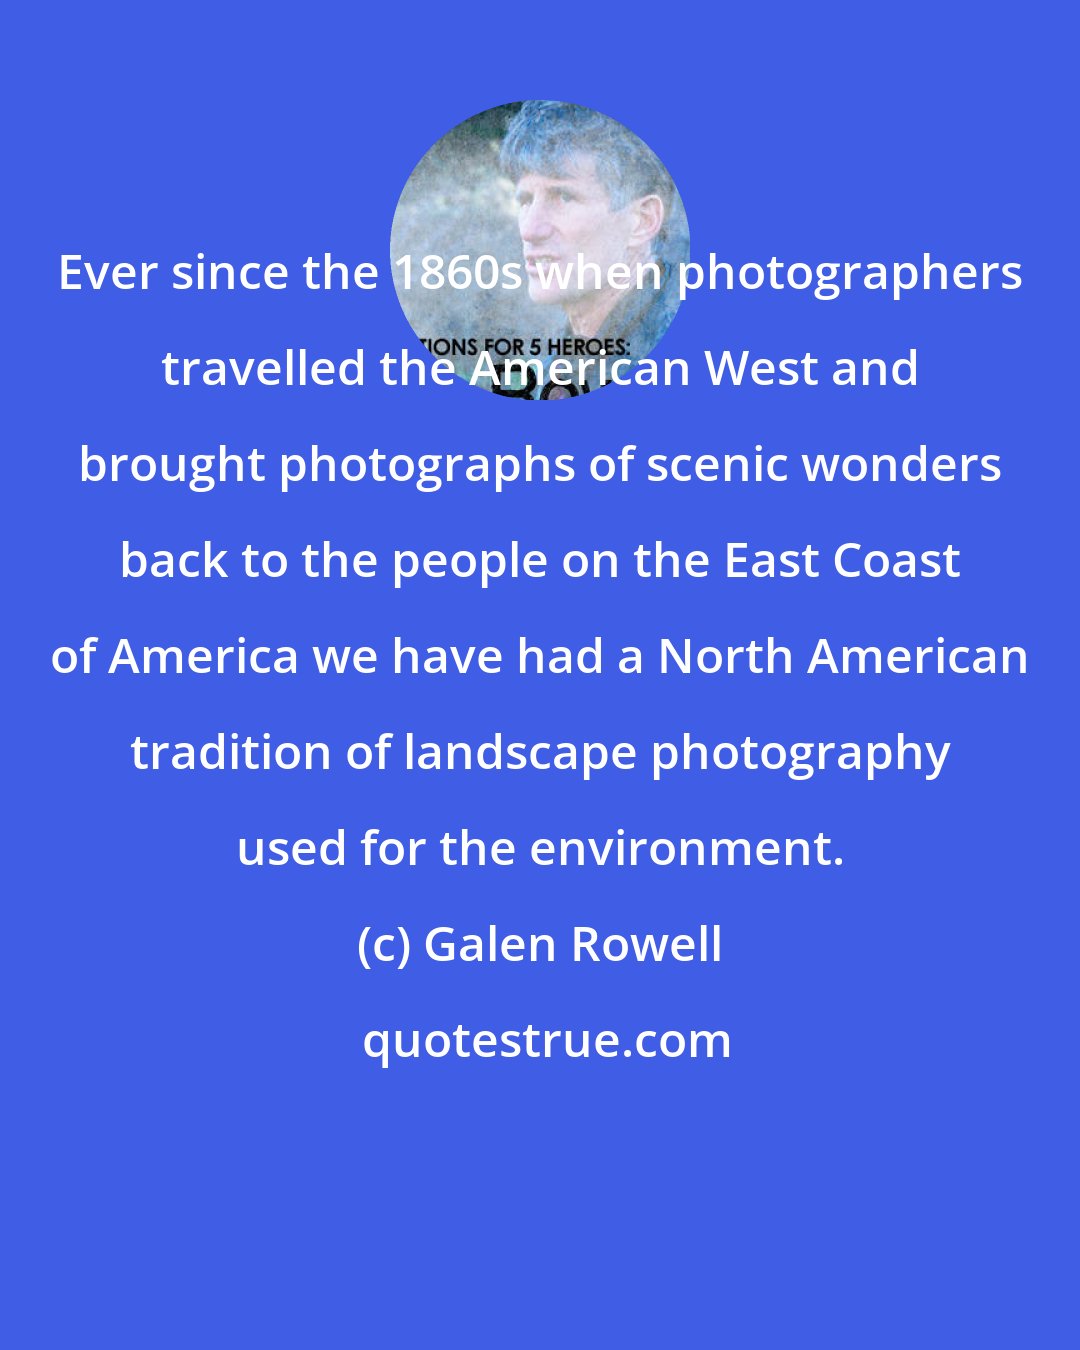 Galen Rowell: Ever since the 1860s when photographers travelled the American West and brought photographs of scenic wonders back to the people on the East Coast of America we have had a North American tradition of landscape photography used for the environment.